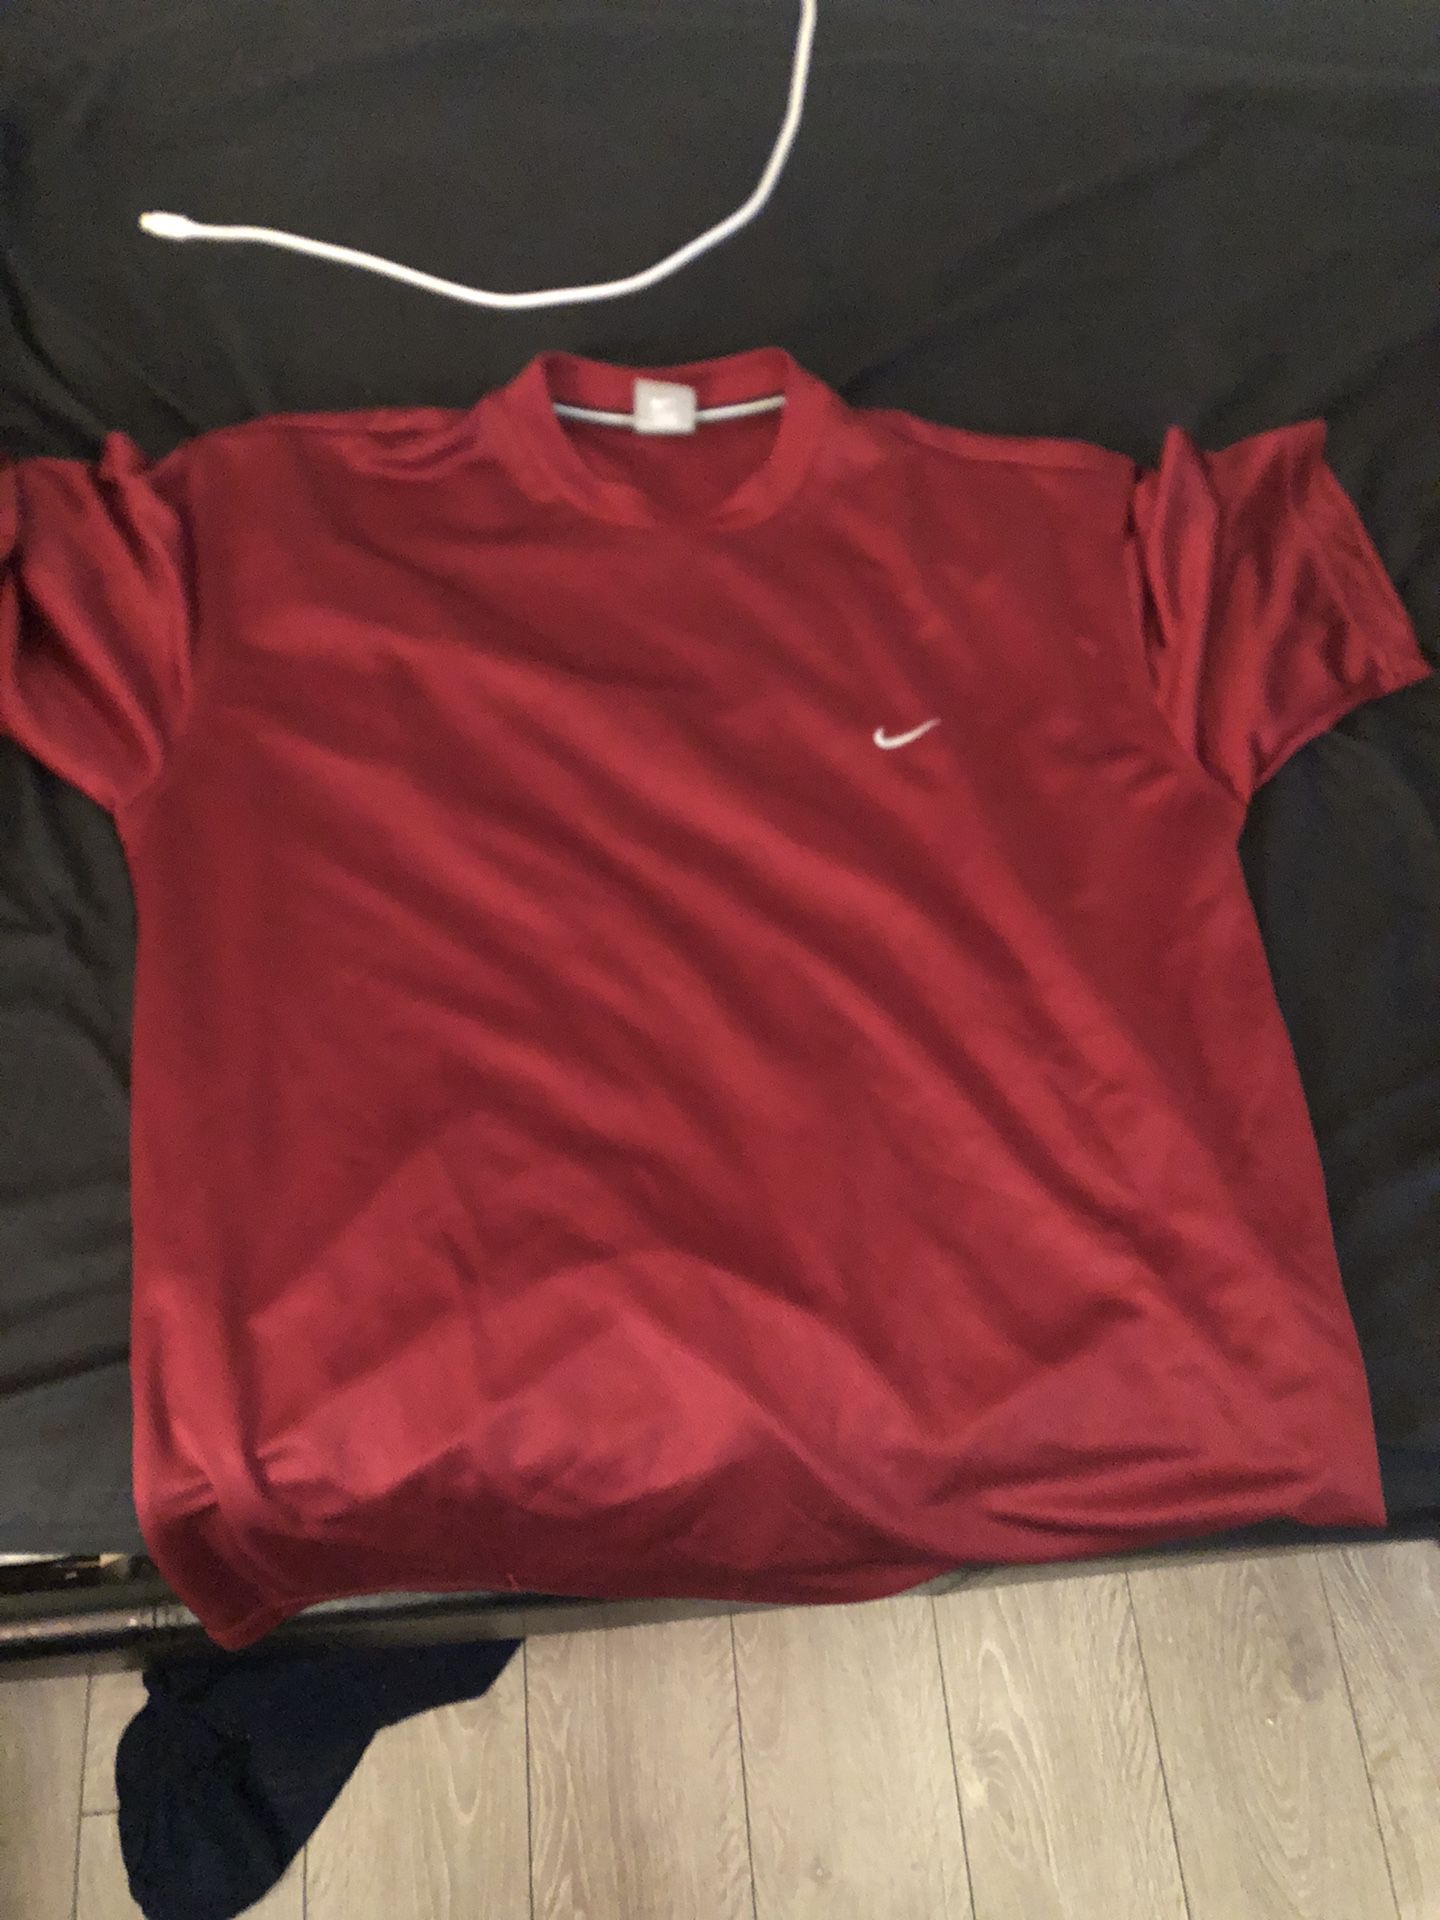 Nike SIZE XL BUT CAN FIT LARGE burgundy jersey type tee.